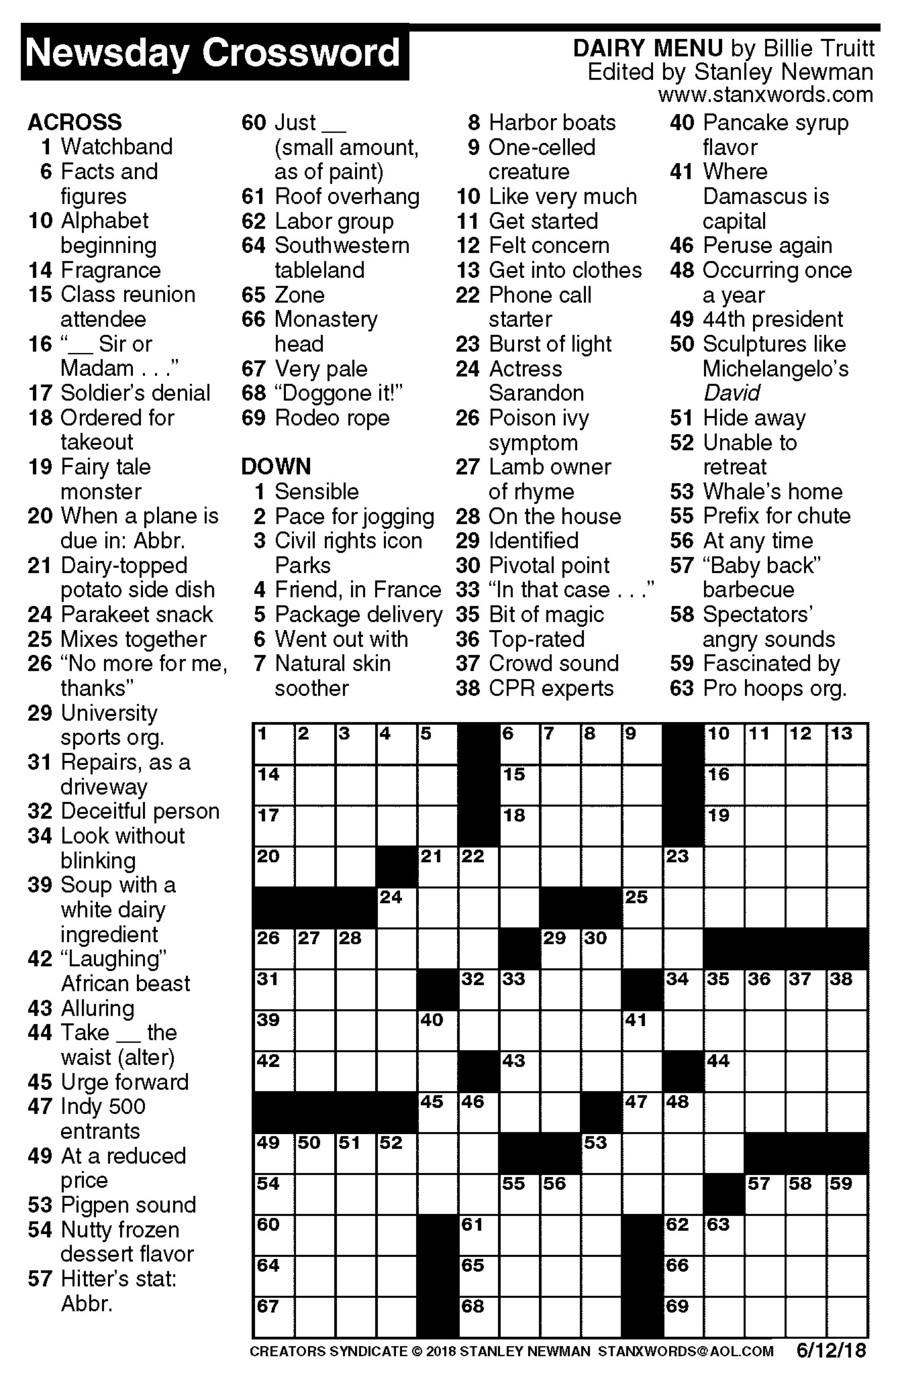 Newsday Crossword Puzzle For Jun 12, 2018,stanley Newman - Printable Crossword Newsday